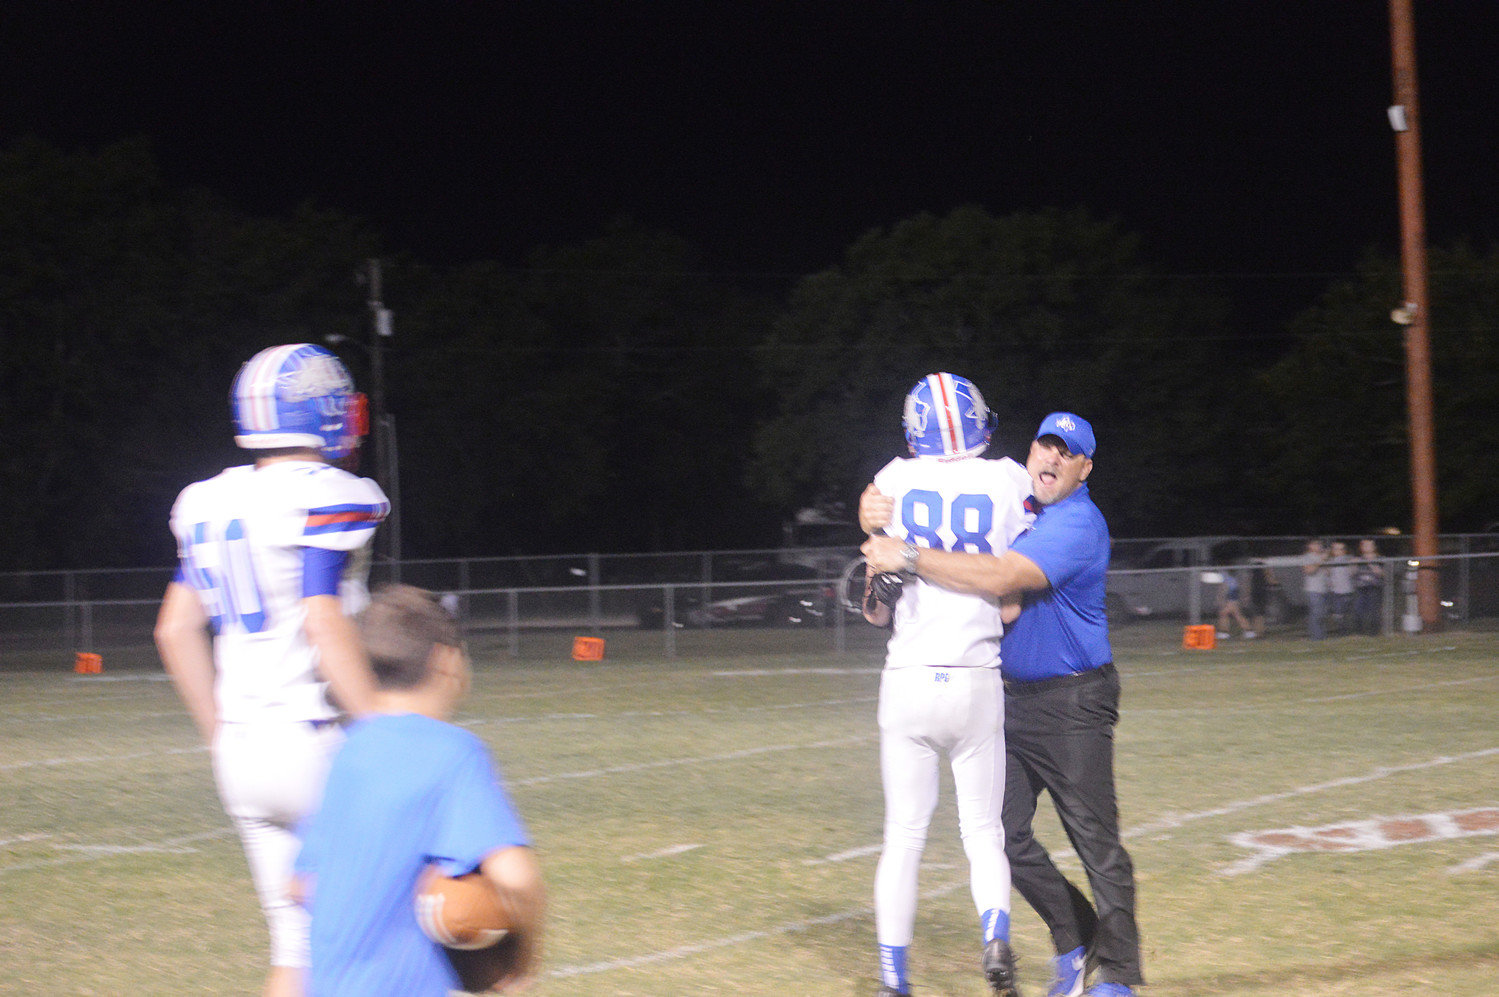 Quitman’s Riley Flanagan (88) meets Coach Bryan Oakes at midfield to celebrate the Bulldogs’ 30-6 win over Cumby.